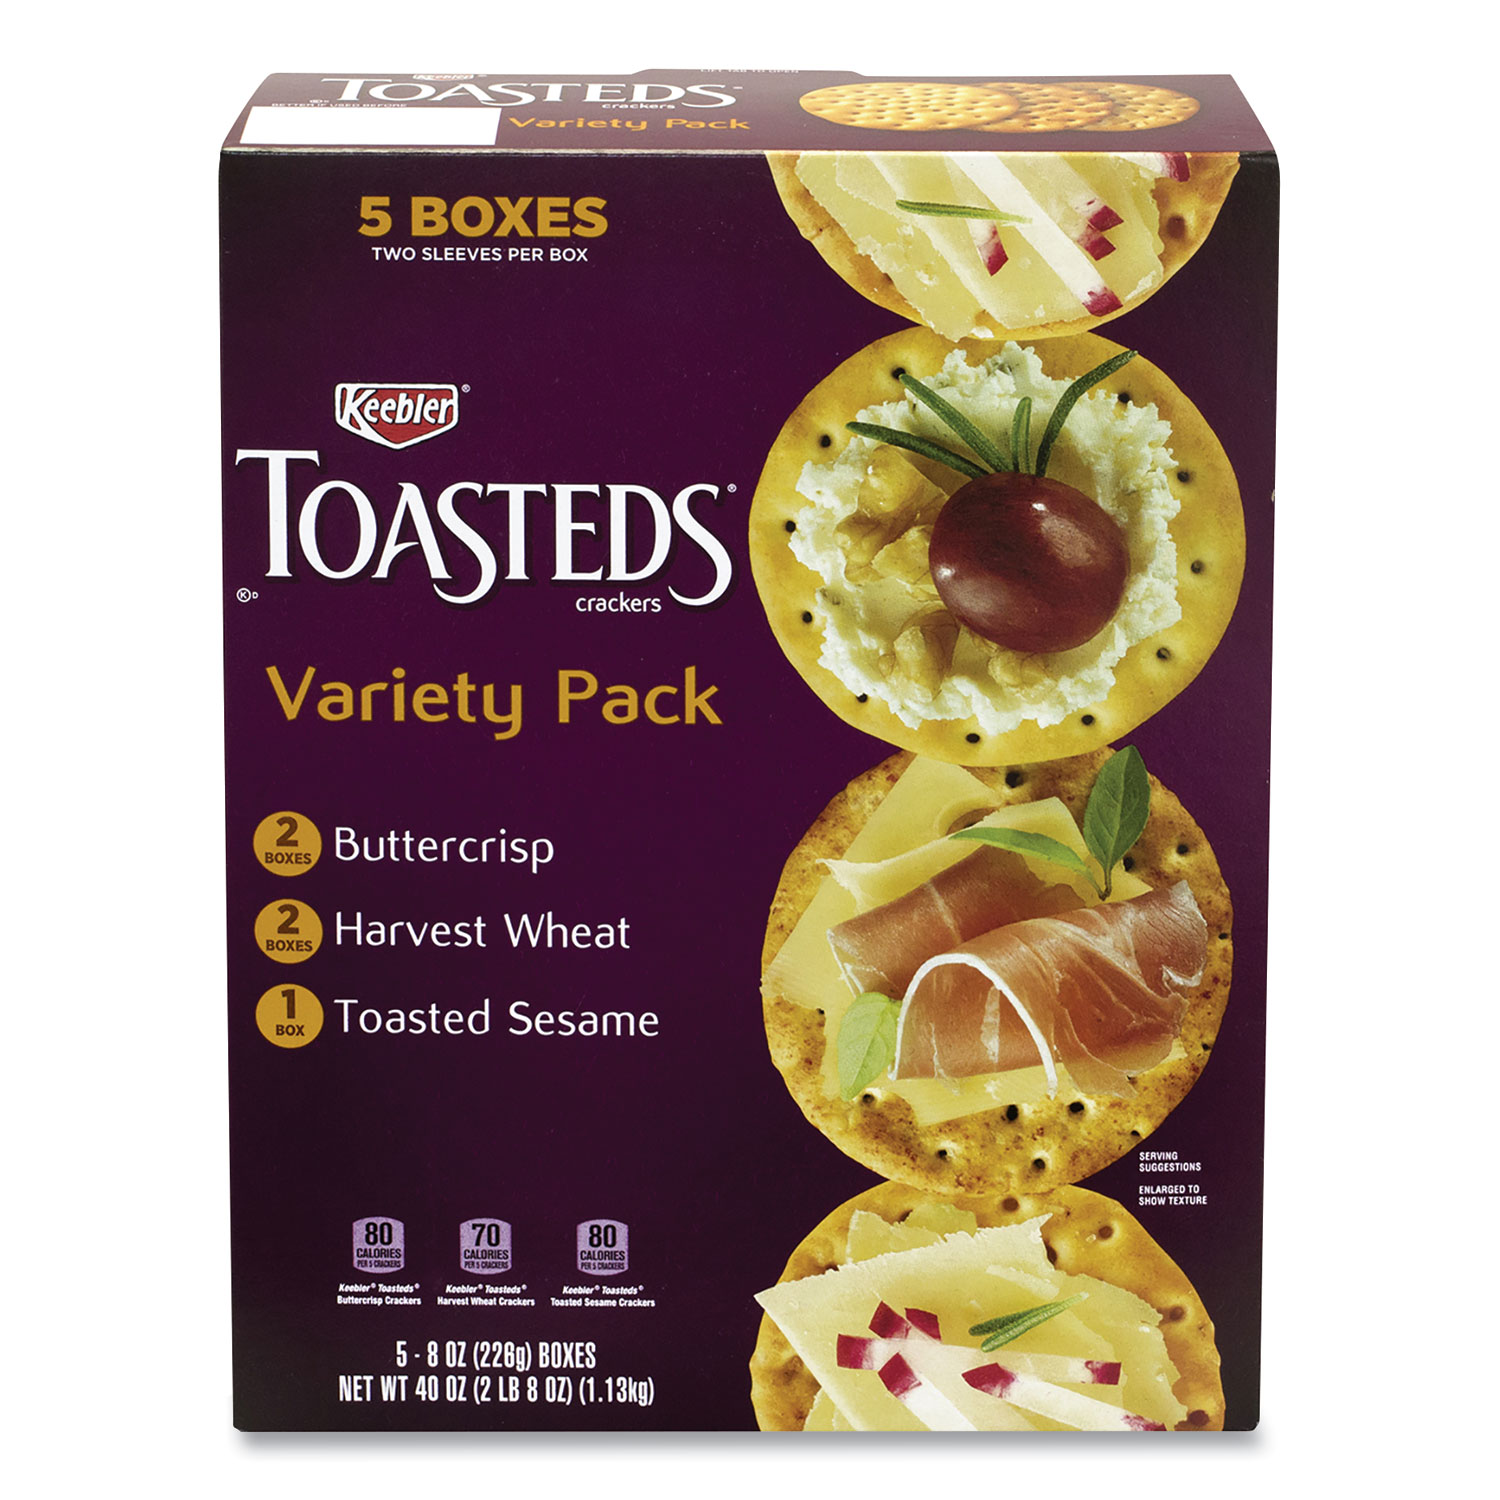  Keebler 22487 Toasteds Party Pack Cracker Assortment, 8 oz Box, 5 Assorted Boxes/Pack, Free Delivery in 1-4 Business Days (GRR90000116) 